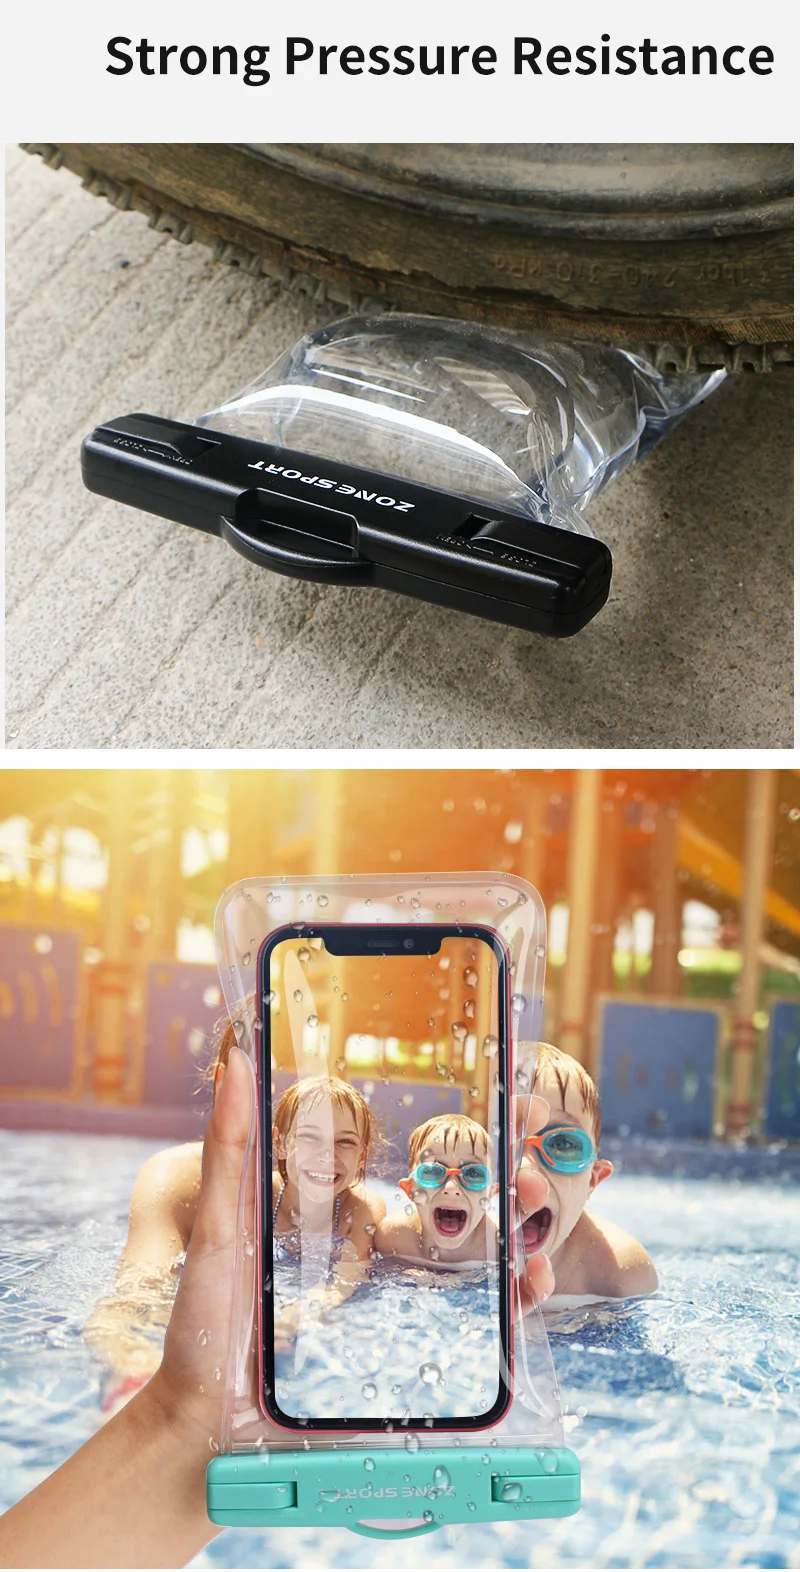 Universal Waterproof Case IPX8 Waterproof Phone Pouch Dry Bag Transparent Phone Pouch